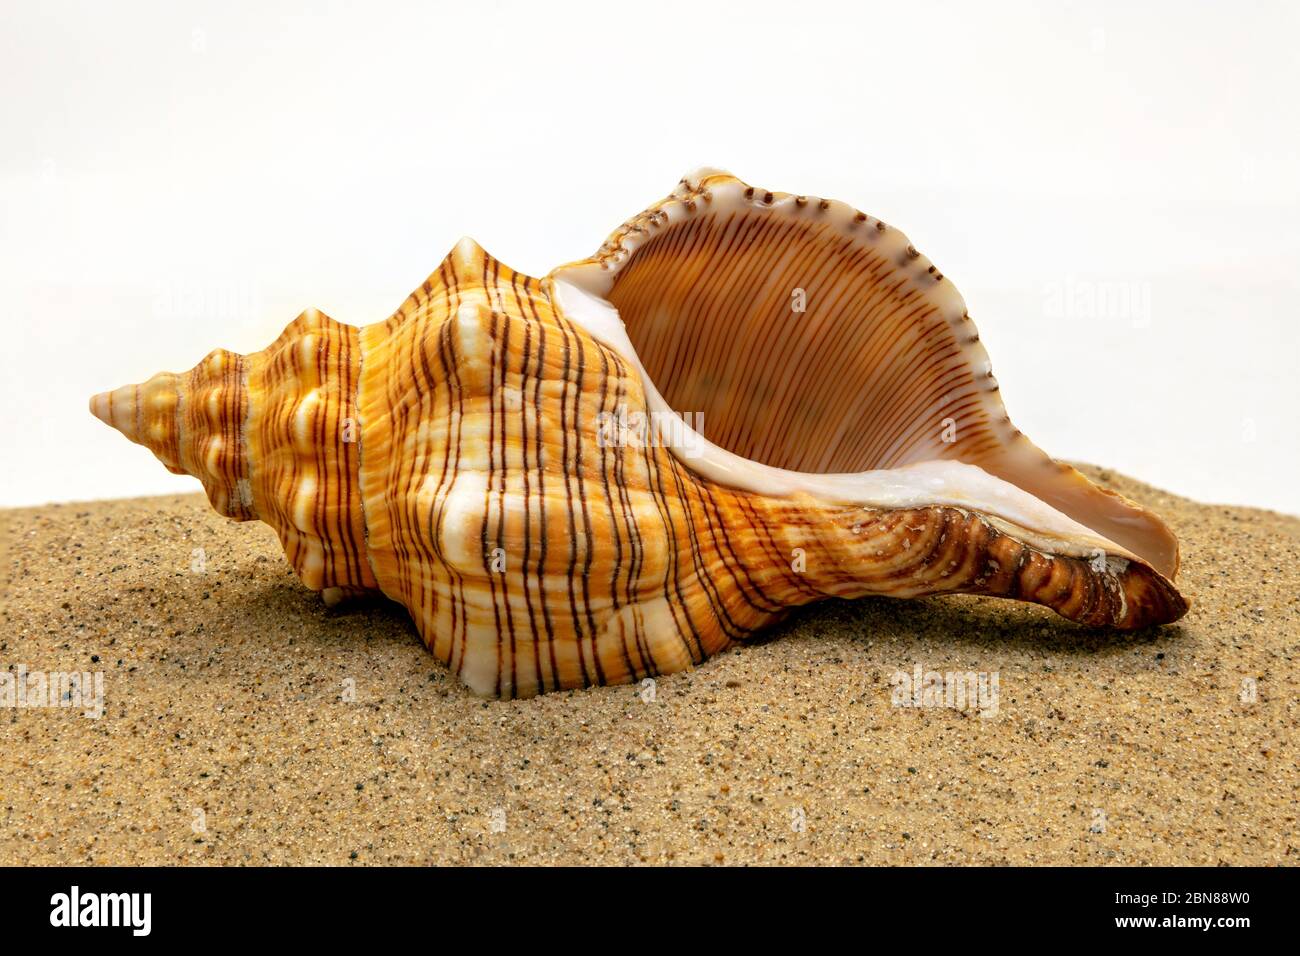 Conch seashells, by James D Coppinger/Dembinsky Photo Assoc Stock Photo